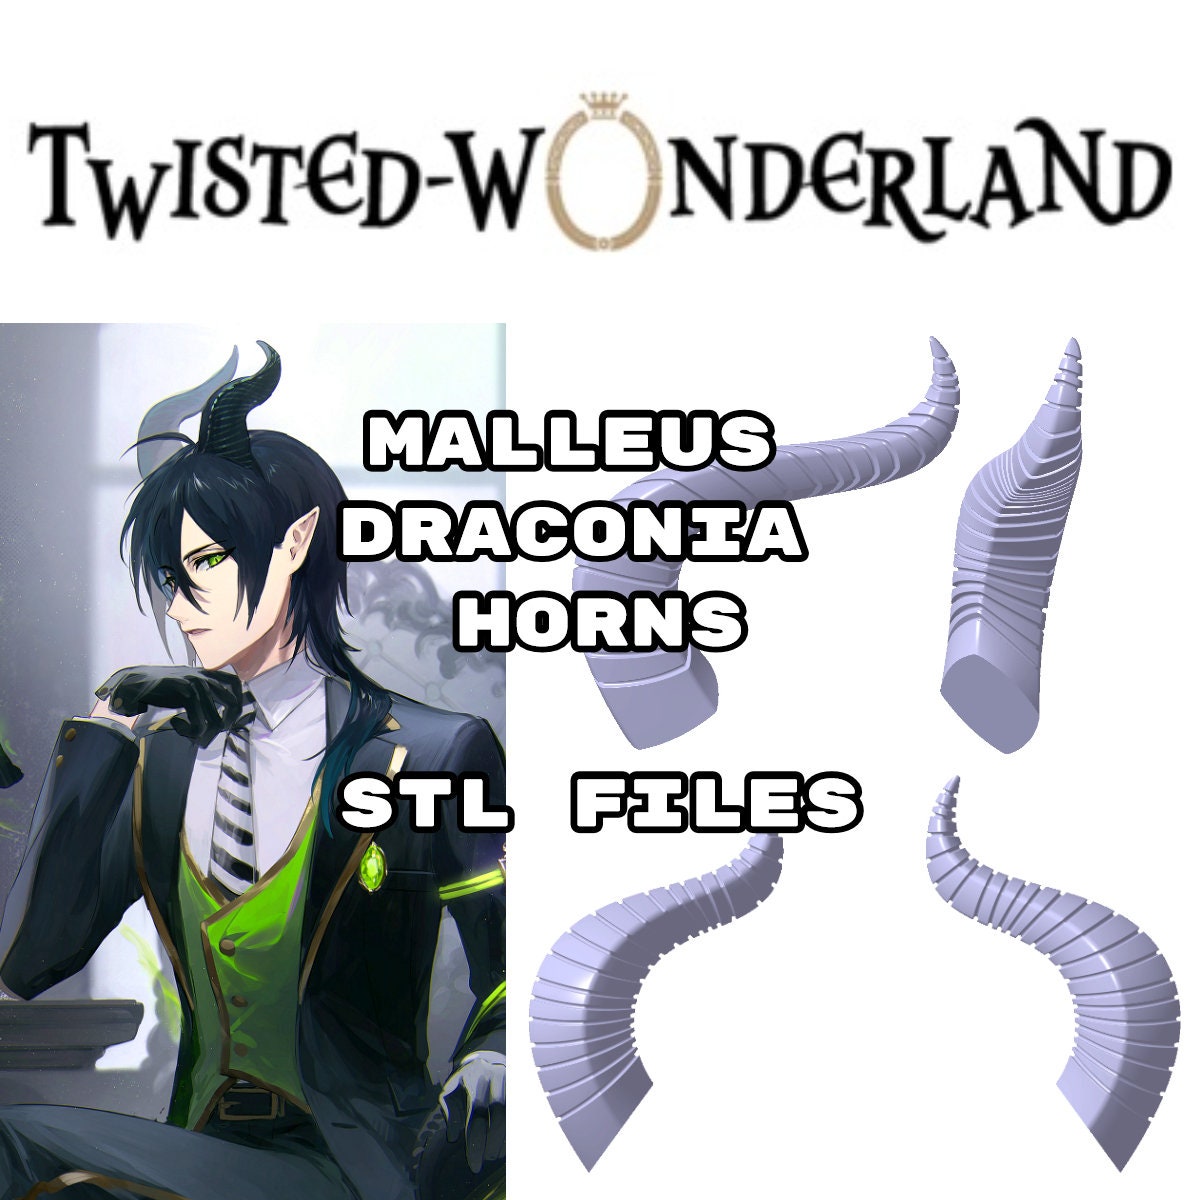 Cosplay of Malleus Draconia from Disney Twisted Wonderland : r/PSO2NGS